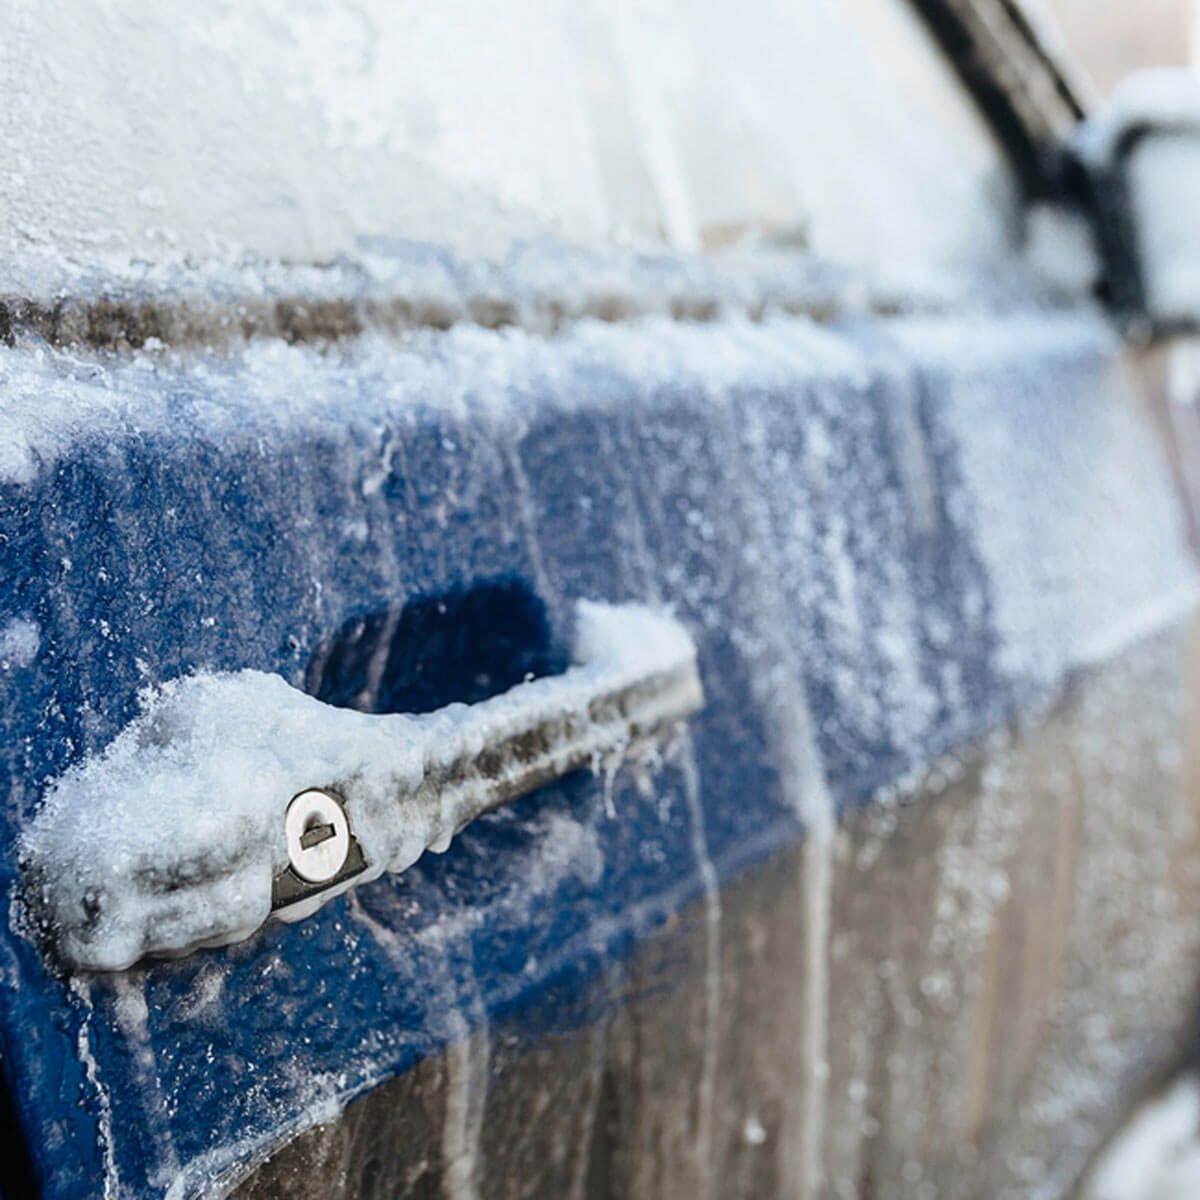 Is De-icer Bad for Your Car and The Environment?